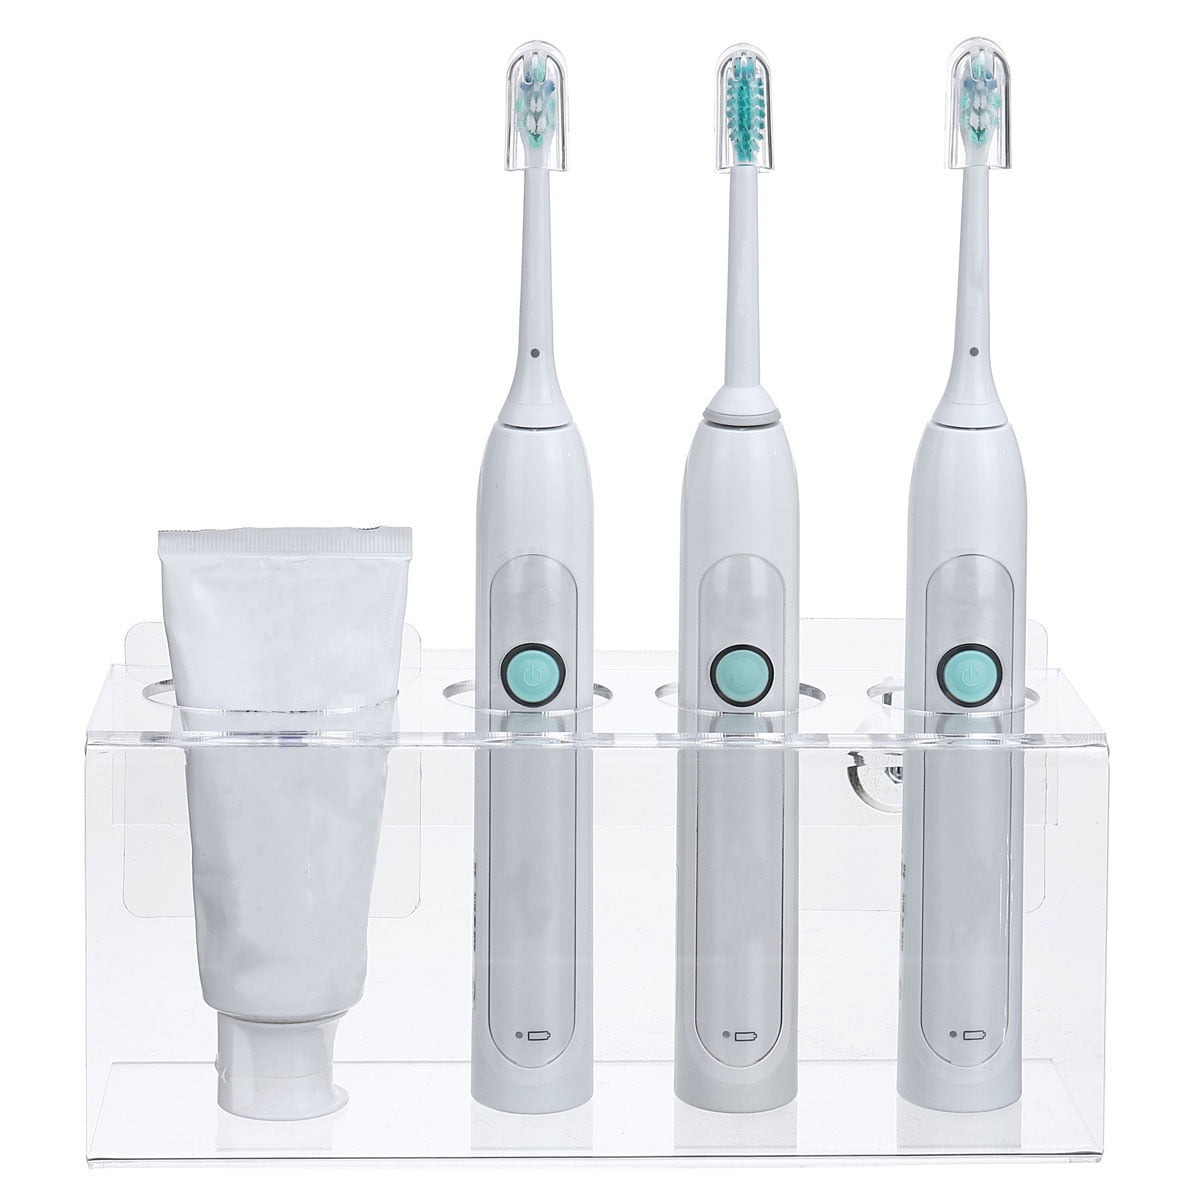 / Wall Mounted Electric Toothbrush Toothpaste Holder Bathroom Organiser 